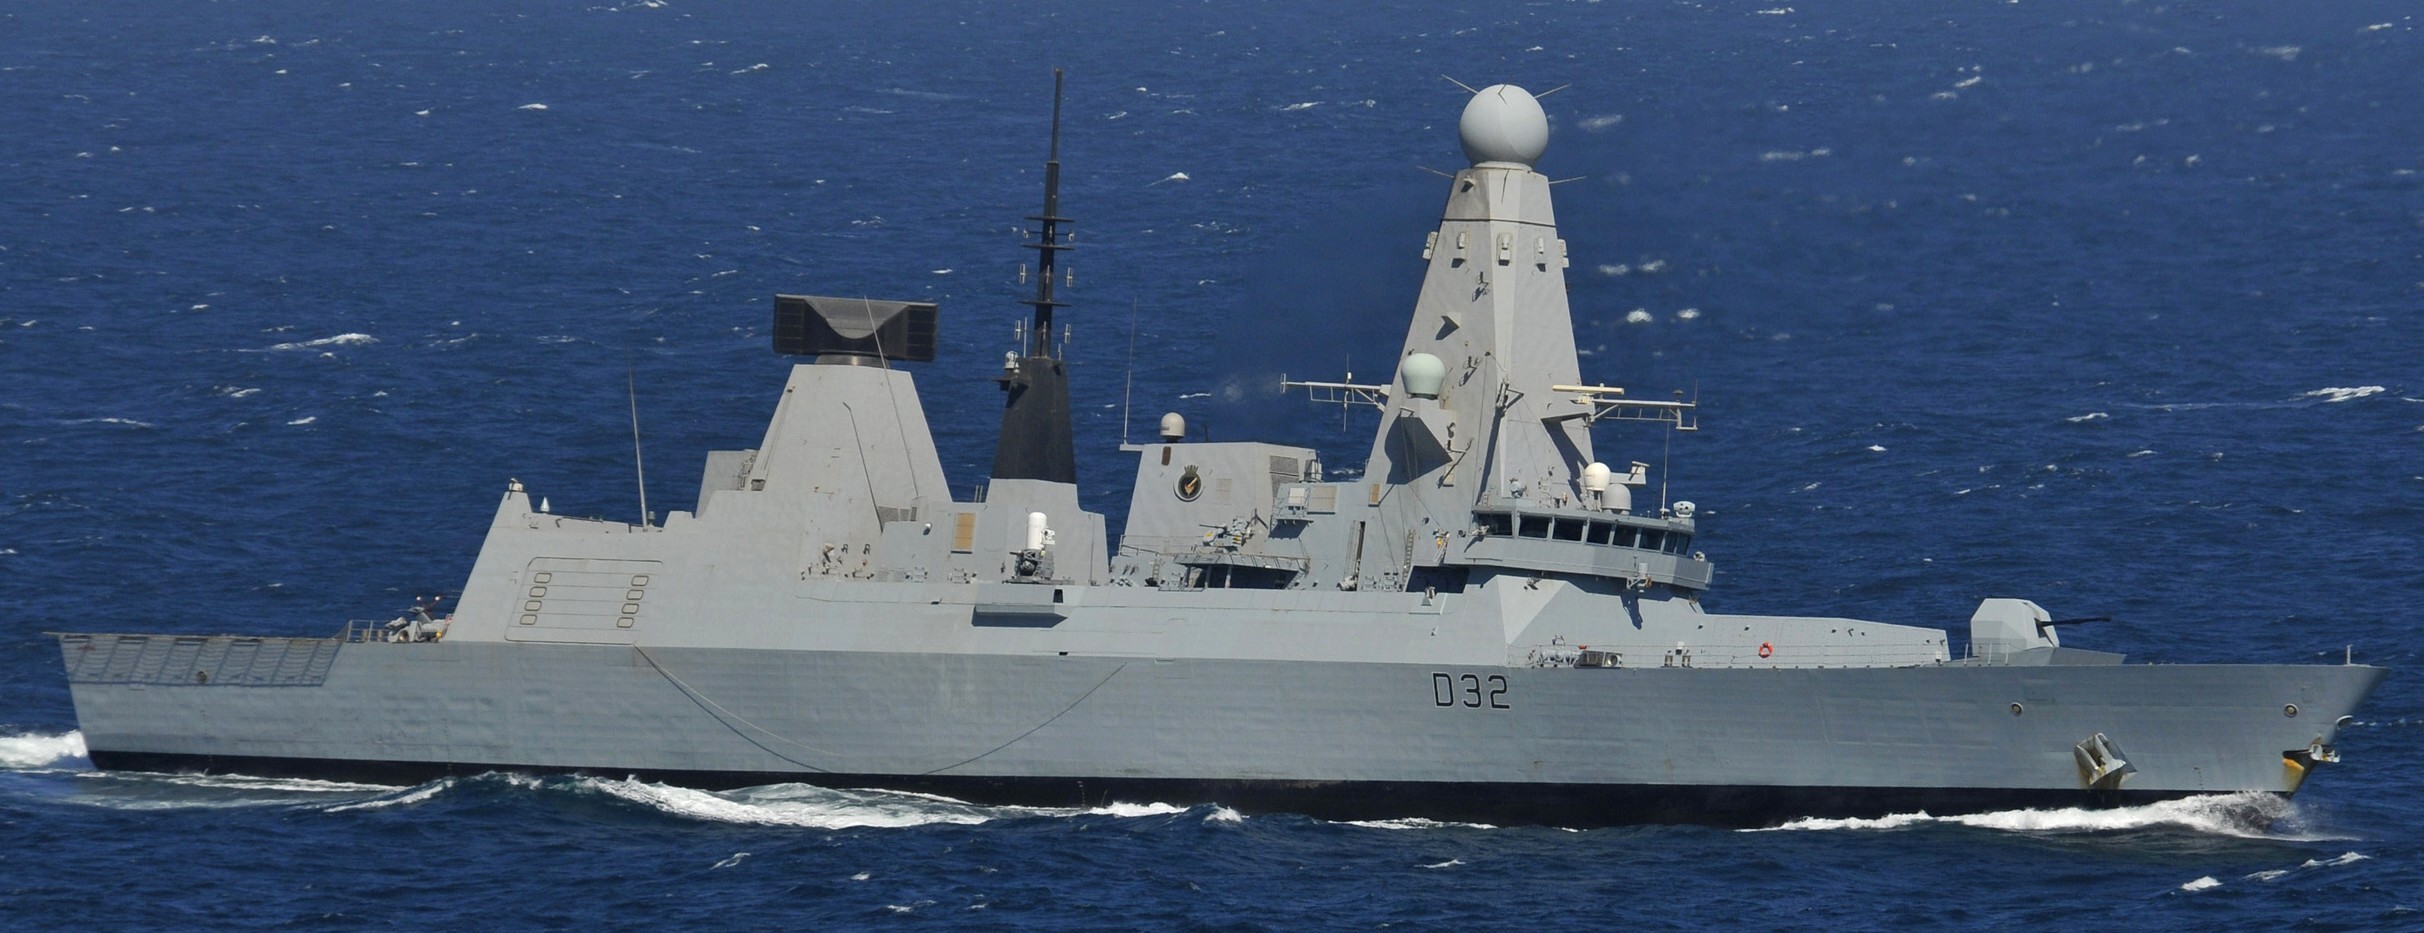 hms daring d-32 type 45 class guided missile destroyer royal navy sea viper paams 16